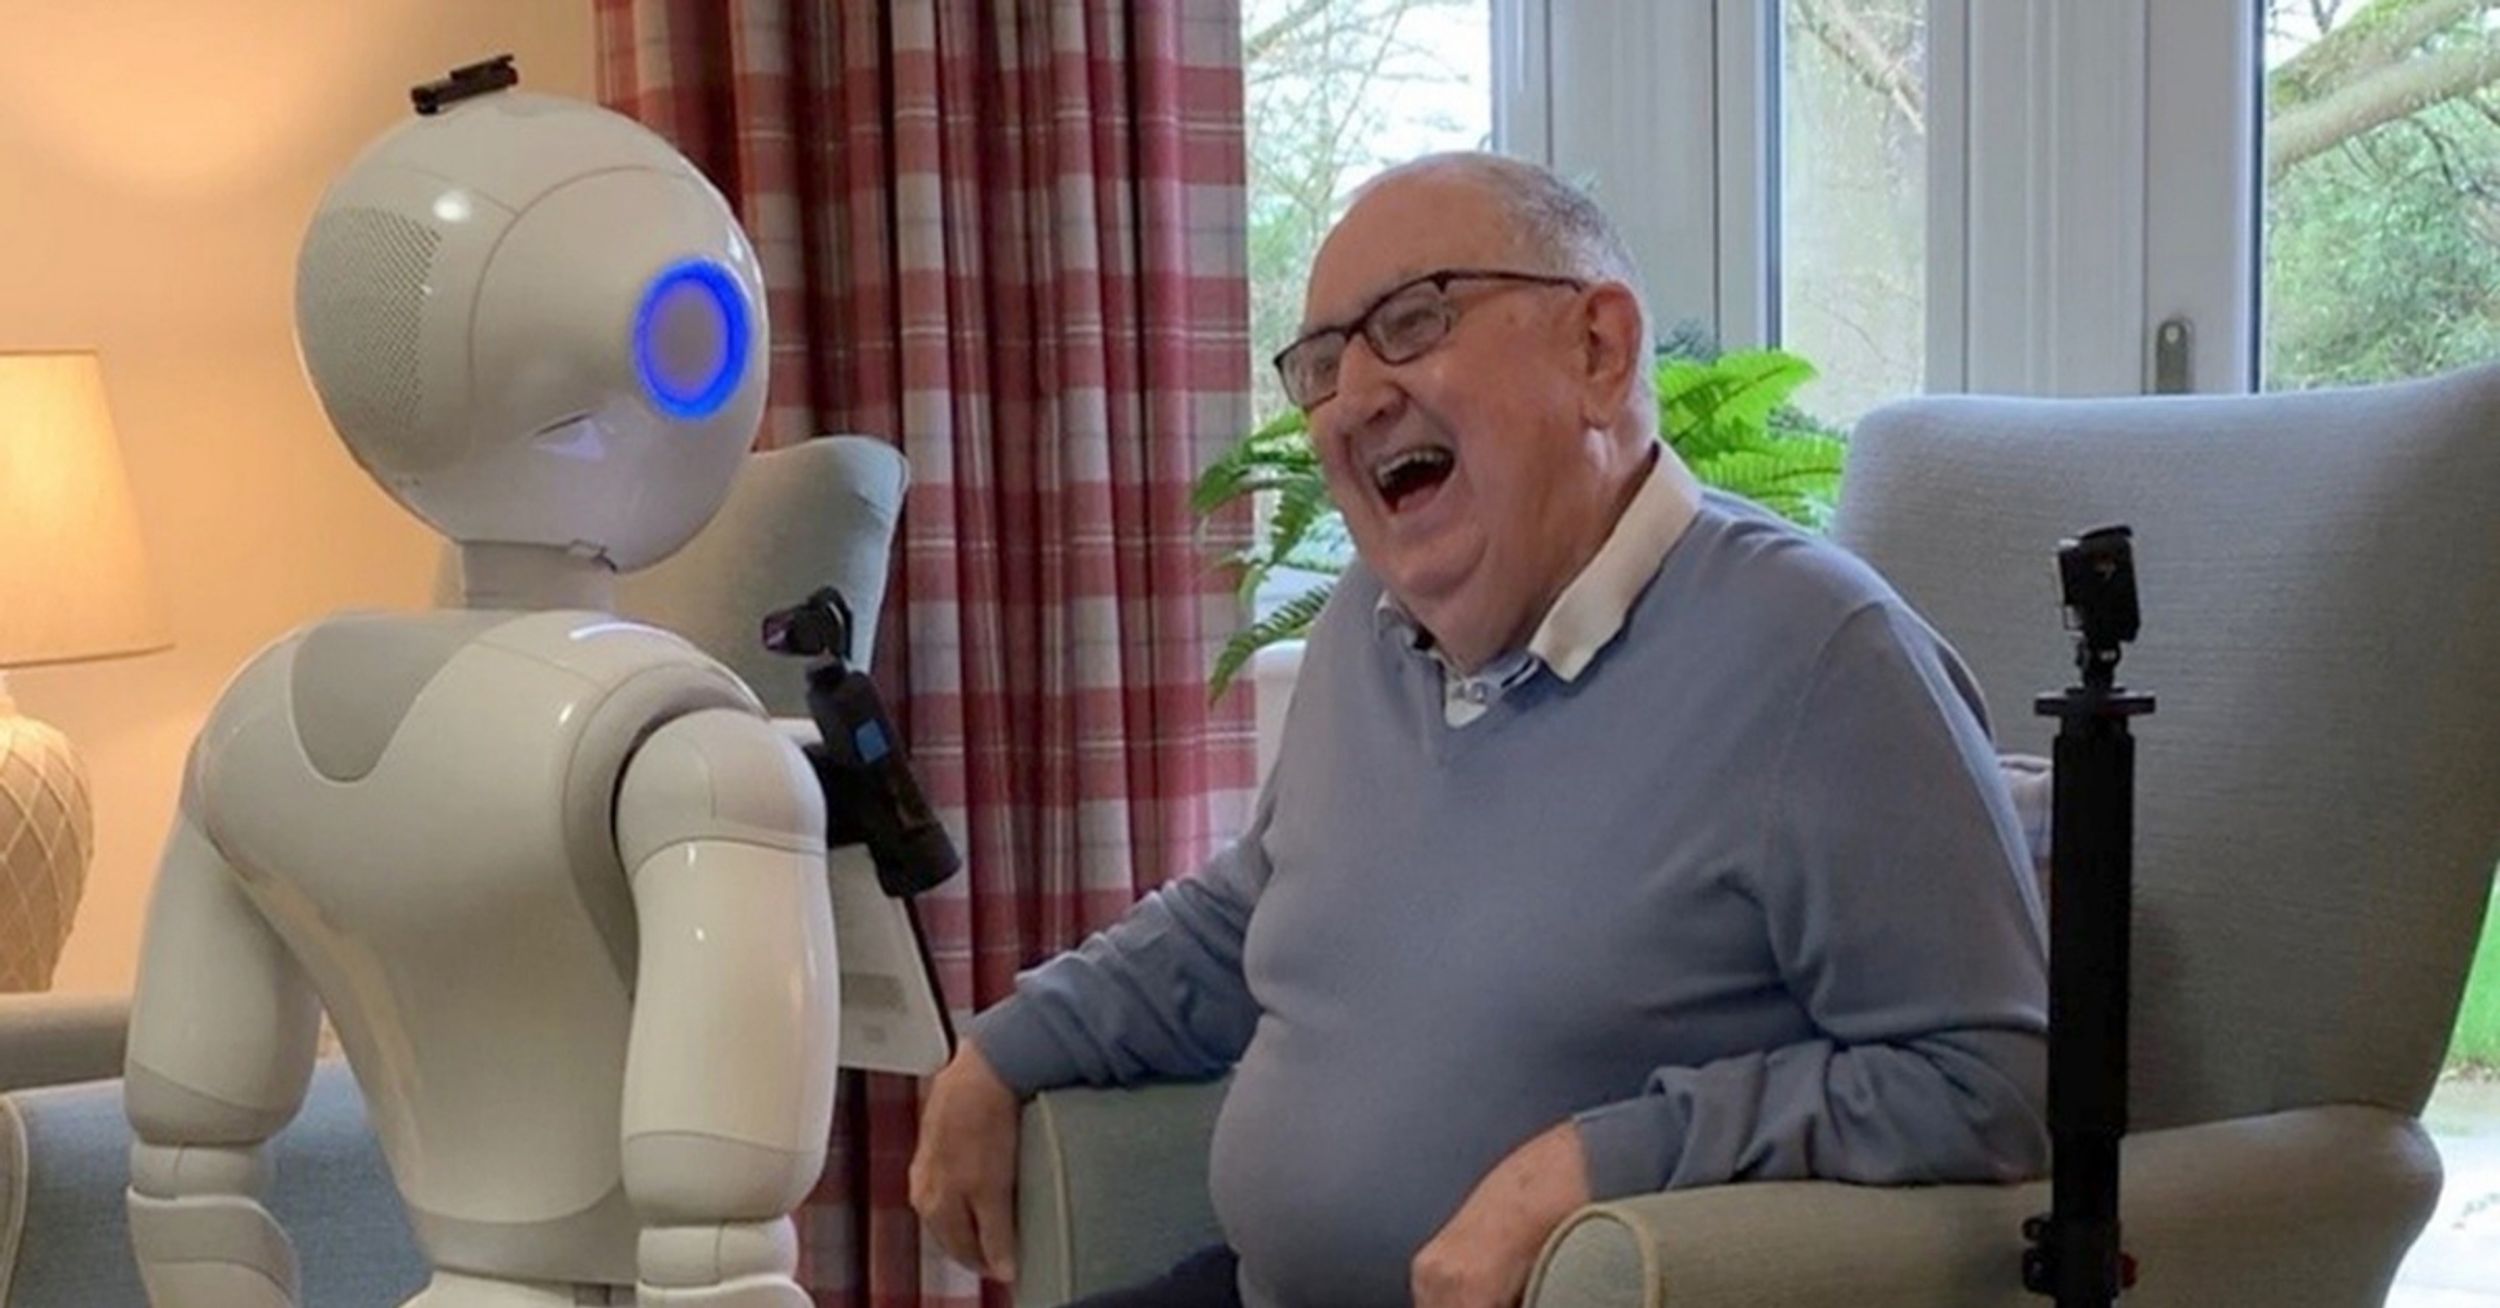 Robots Reduce Loneliness And Improve Mental Health In Elderly People, Study Finds